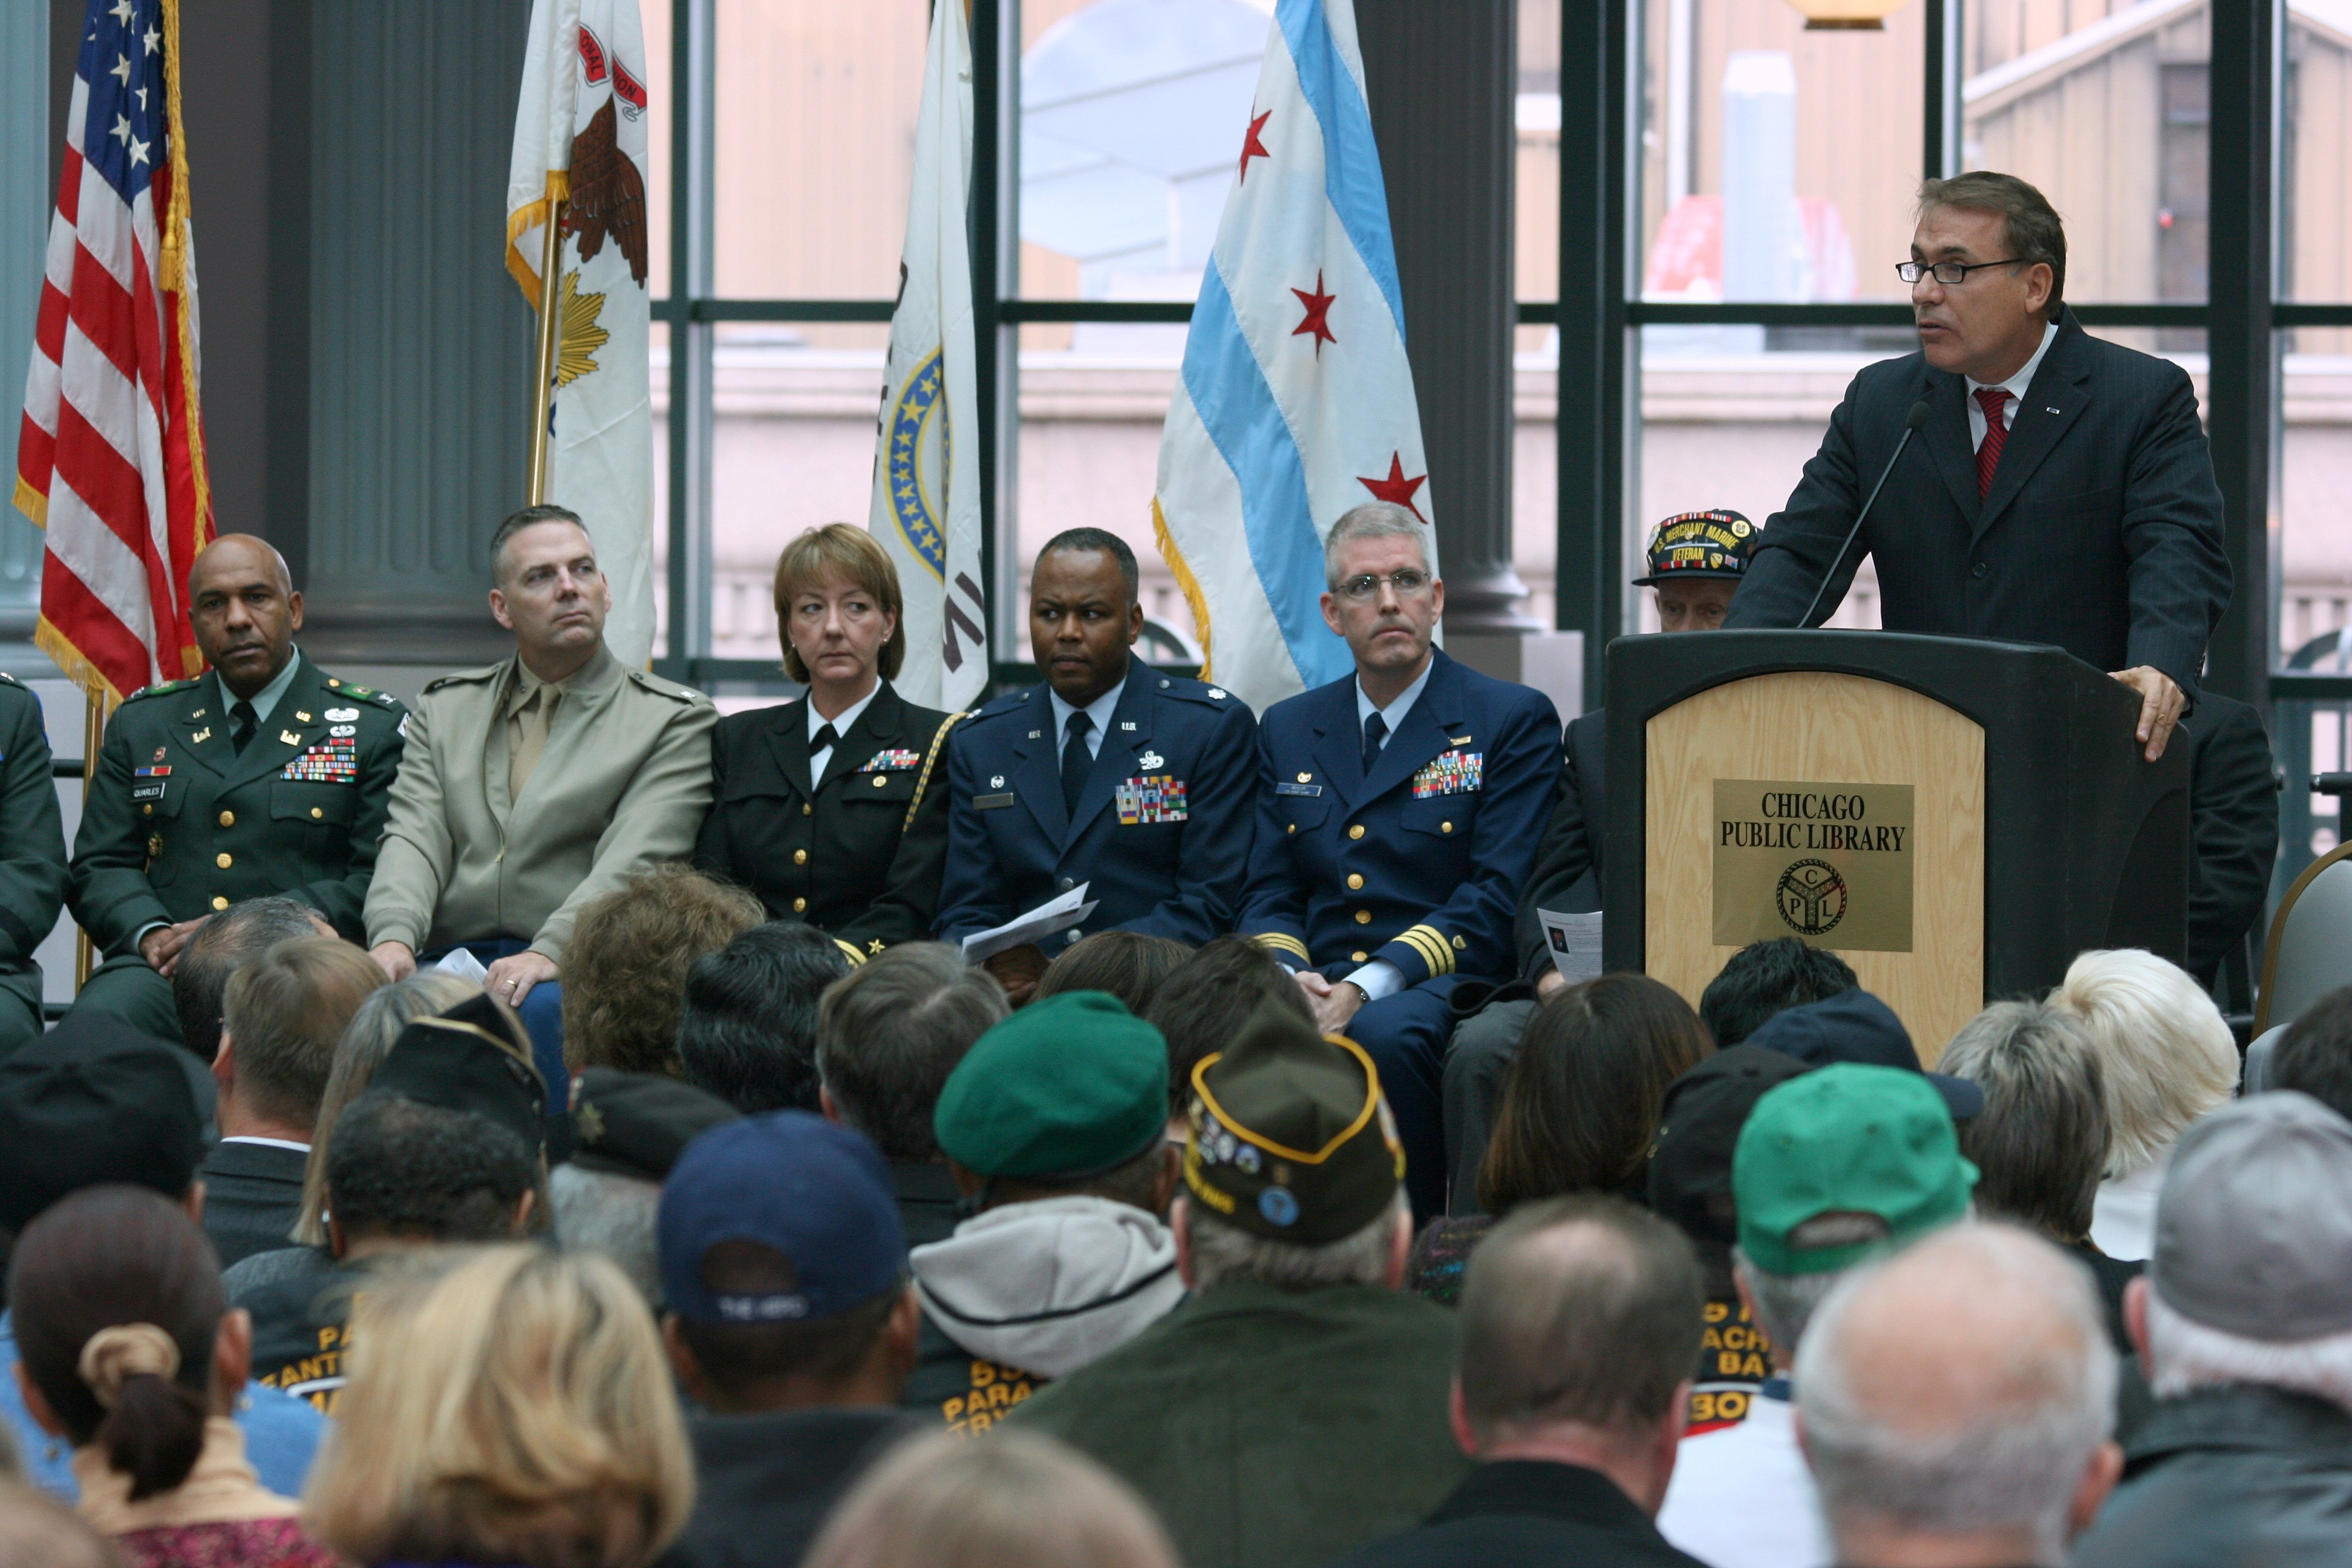 City of Chicago Veterans Day Commemoration Ceremony Article The